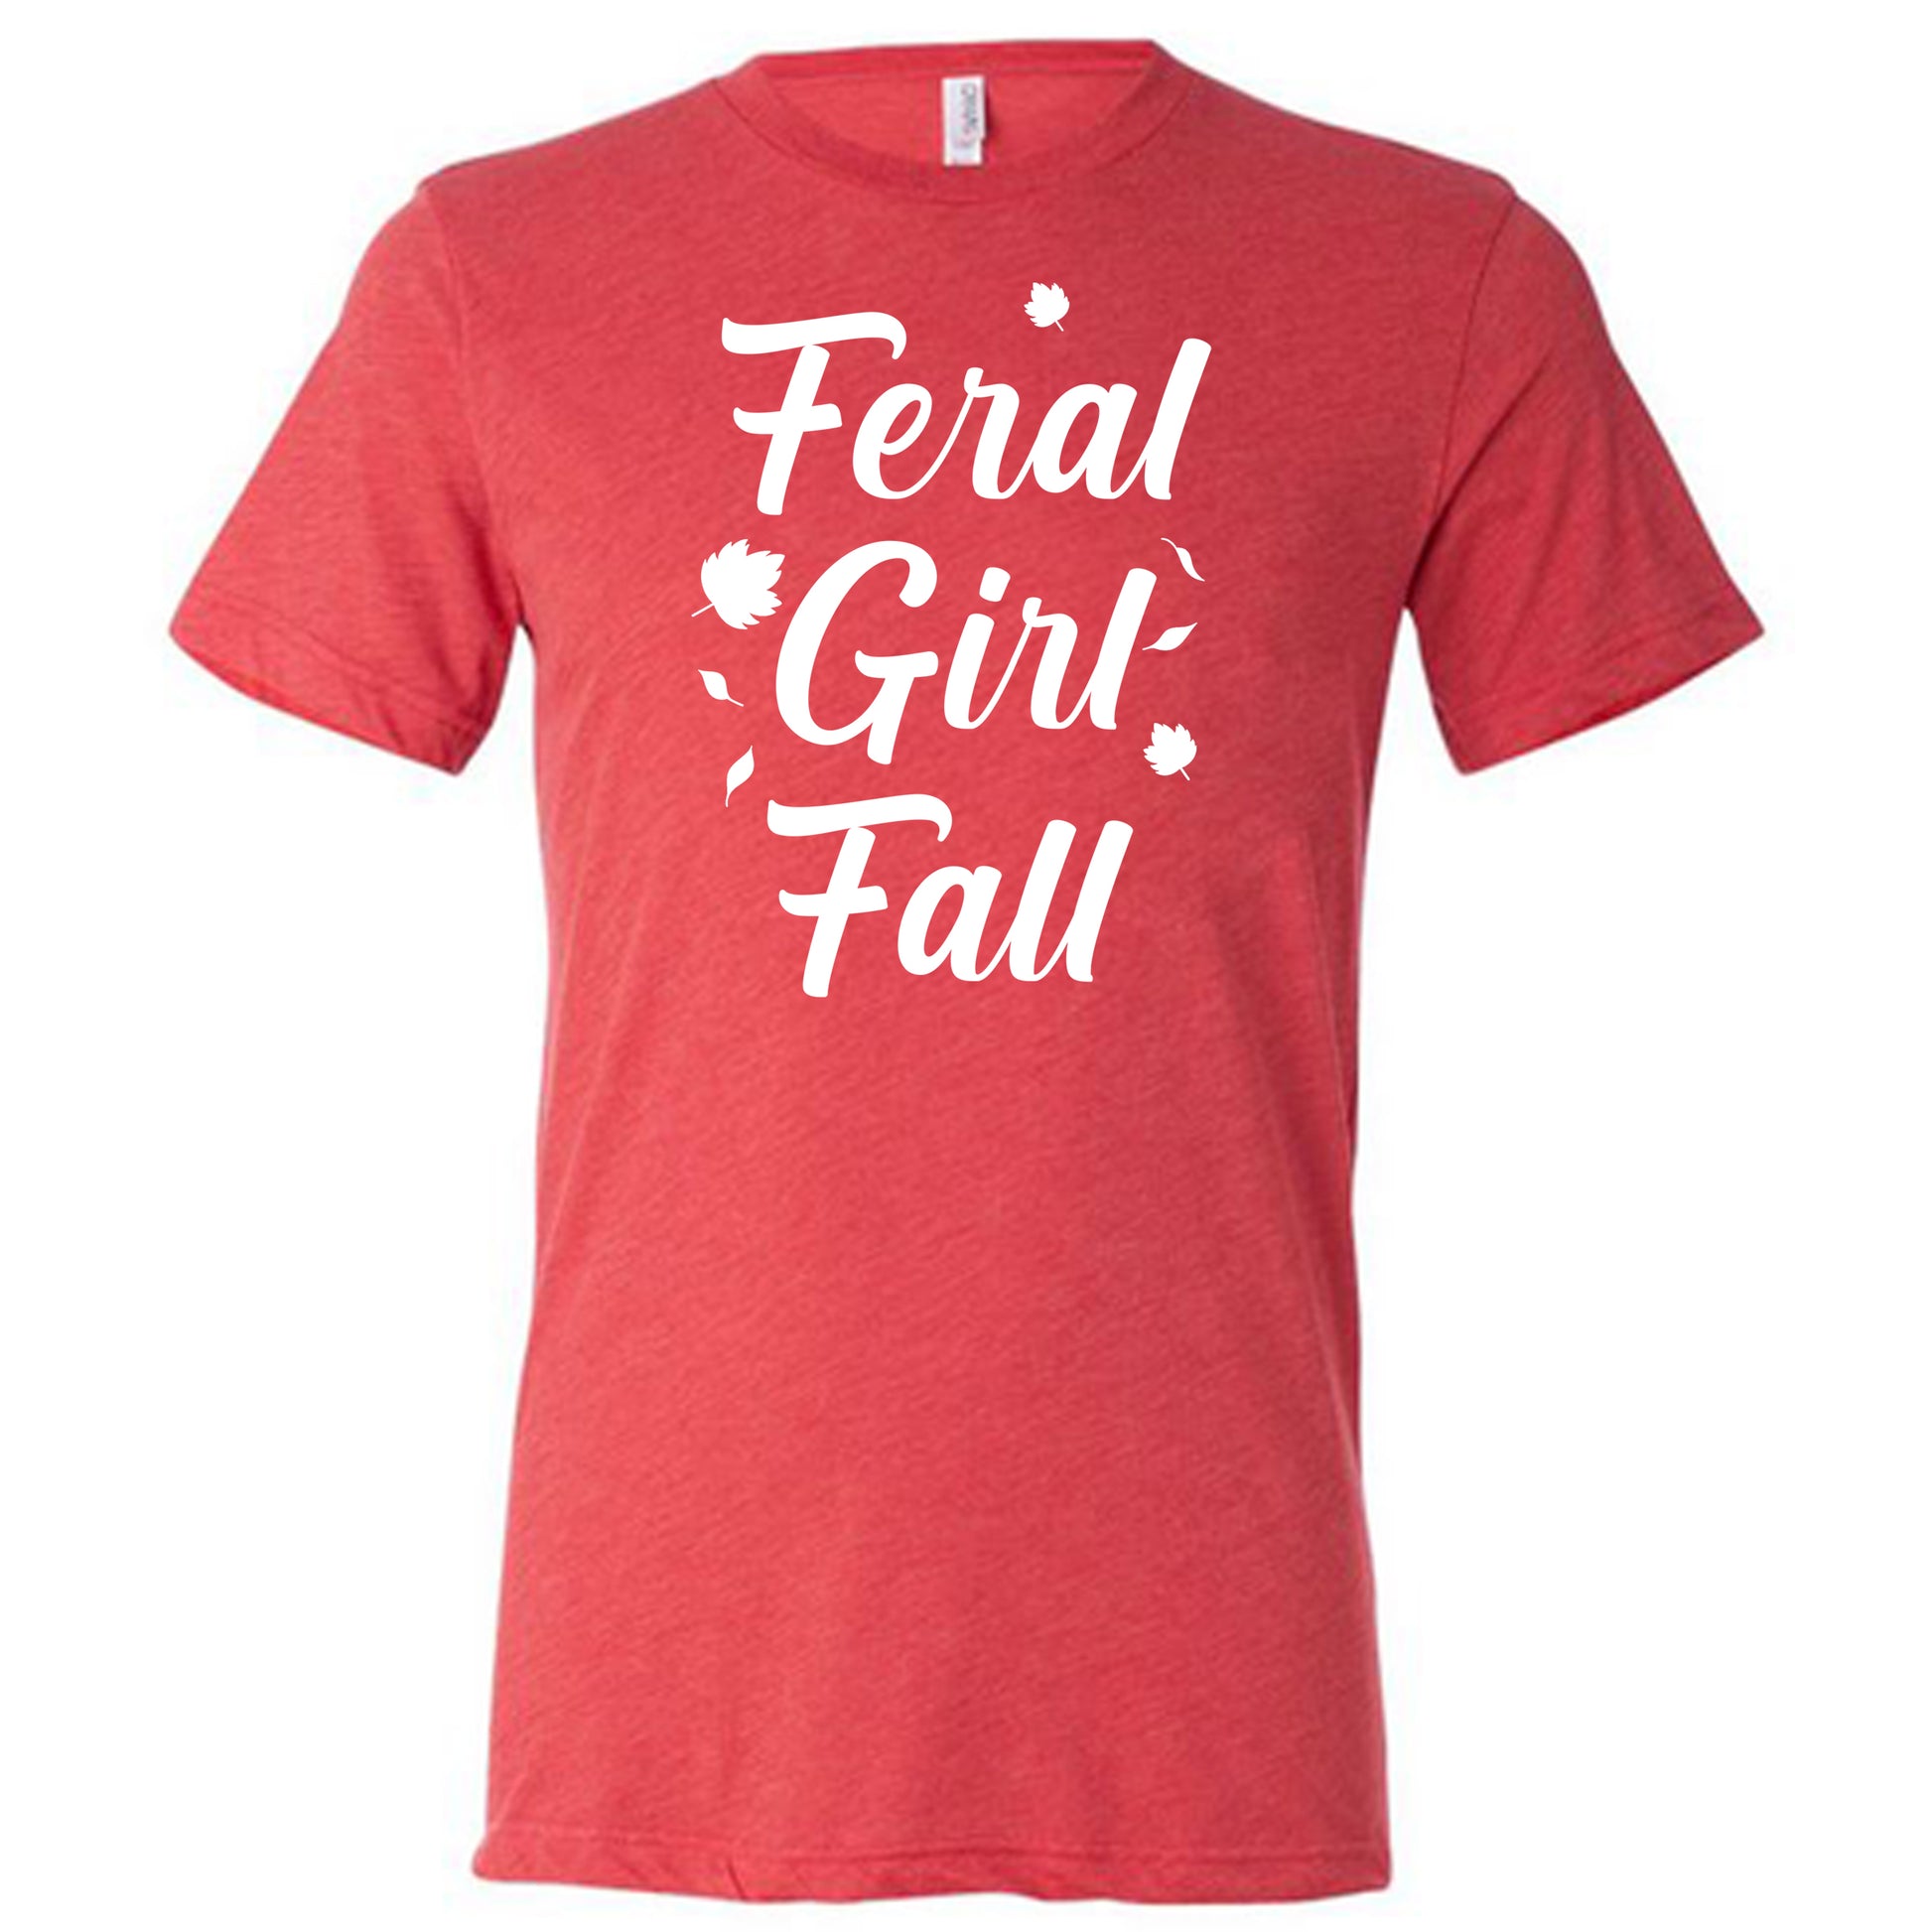 white quote "Feral Girl Fall" on a red shirt